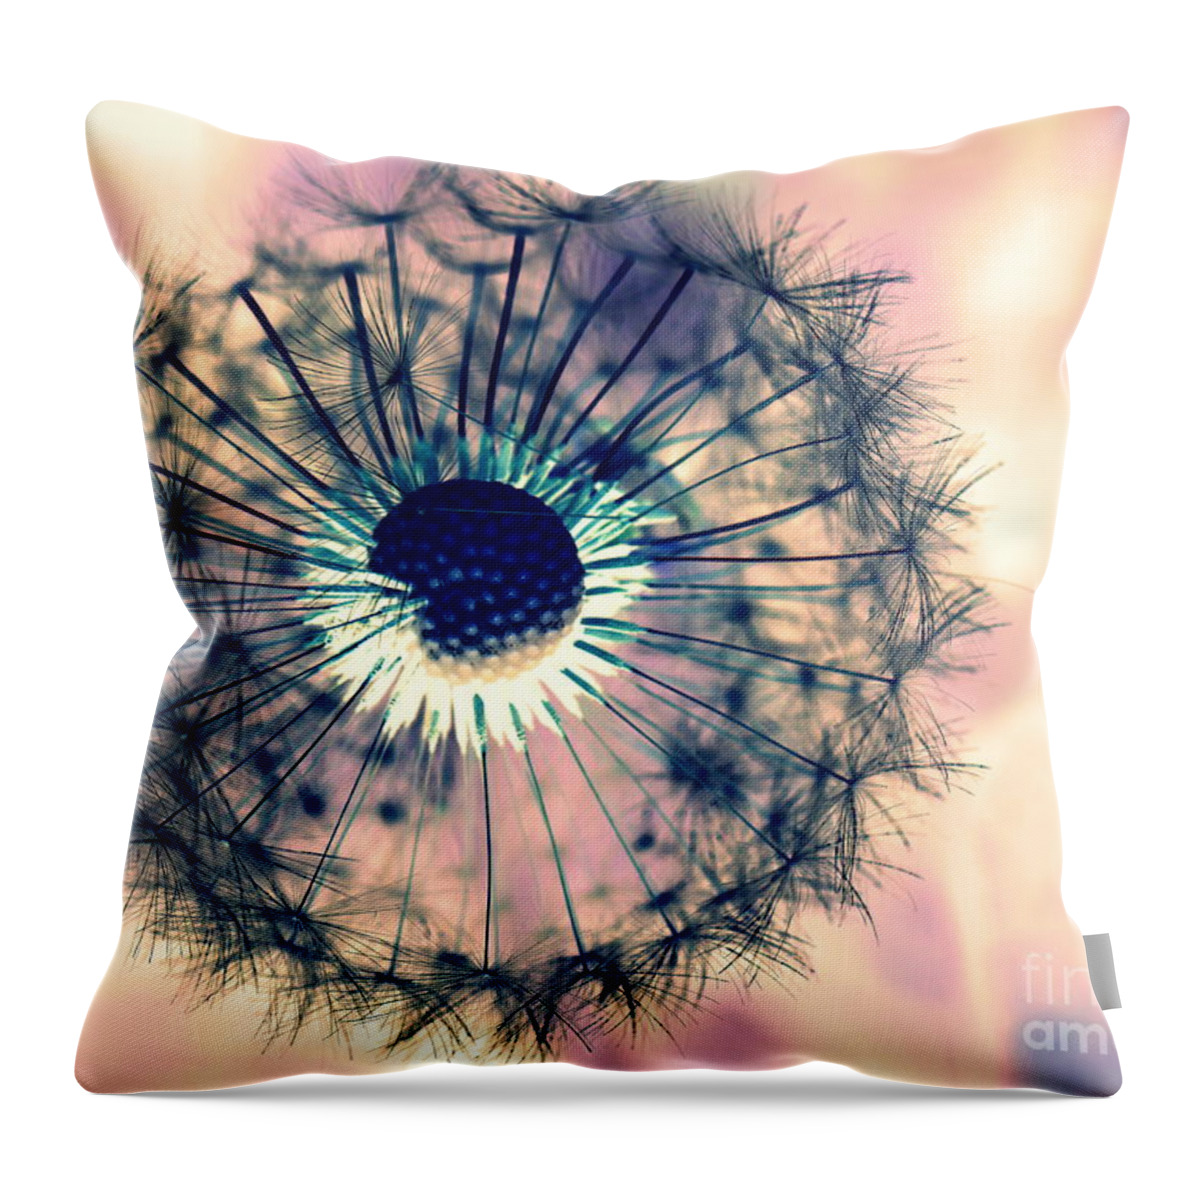 Dandelions Throw Pillow featuring the photograph Dandelion 5 by Amanda Mohler